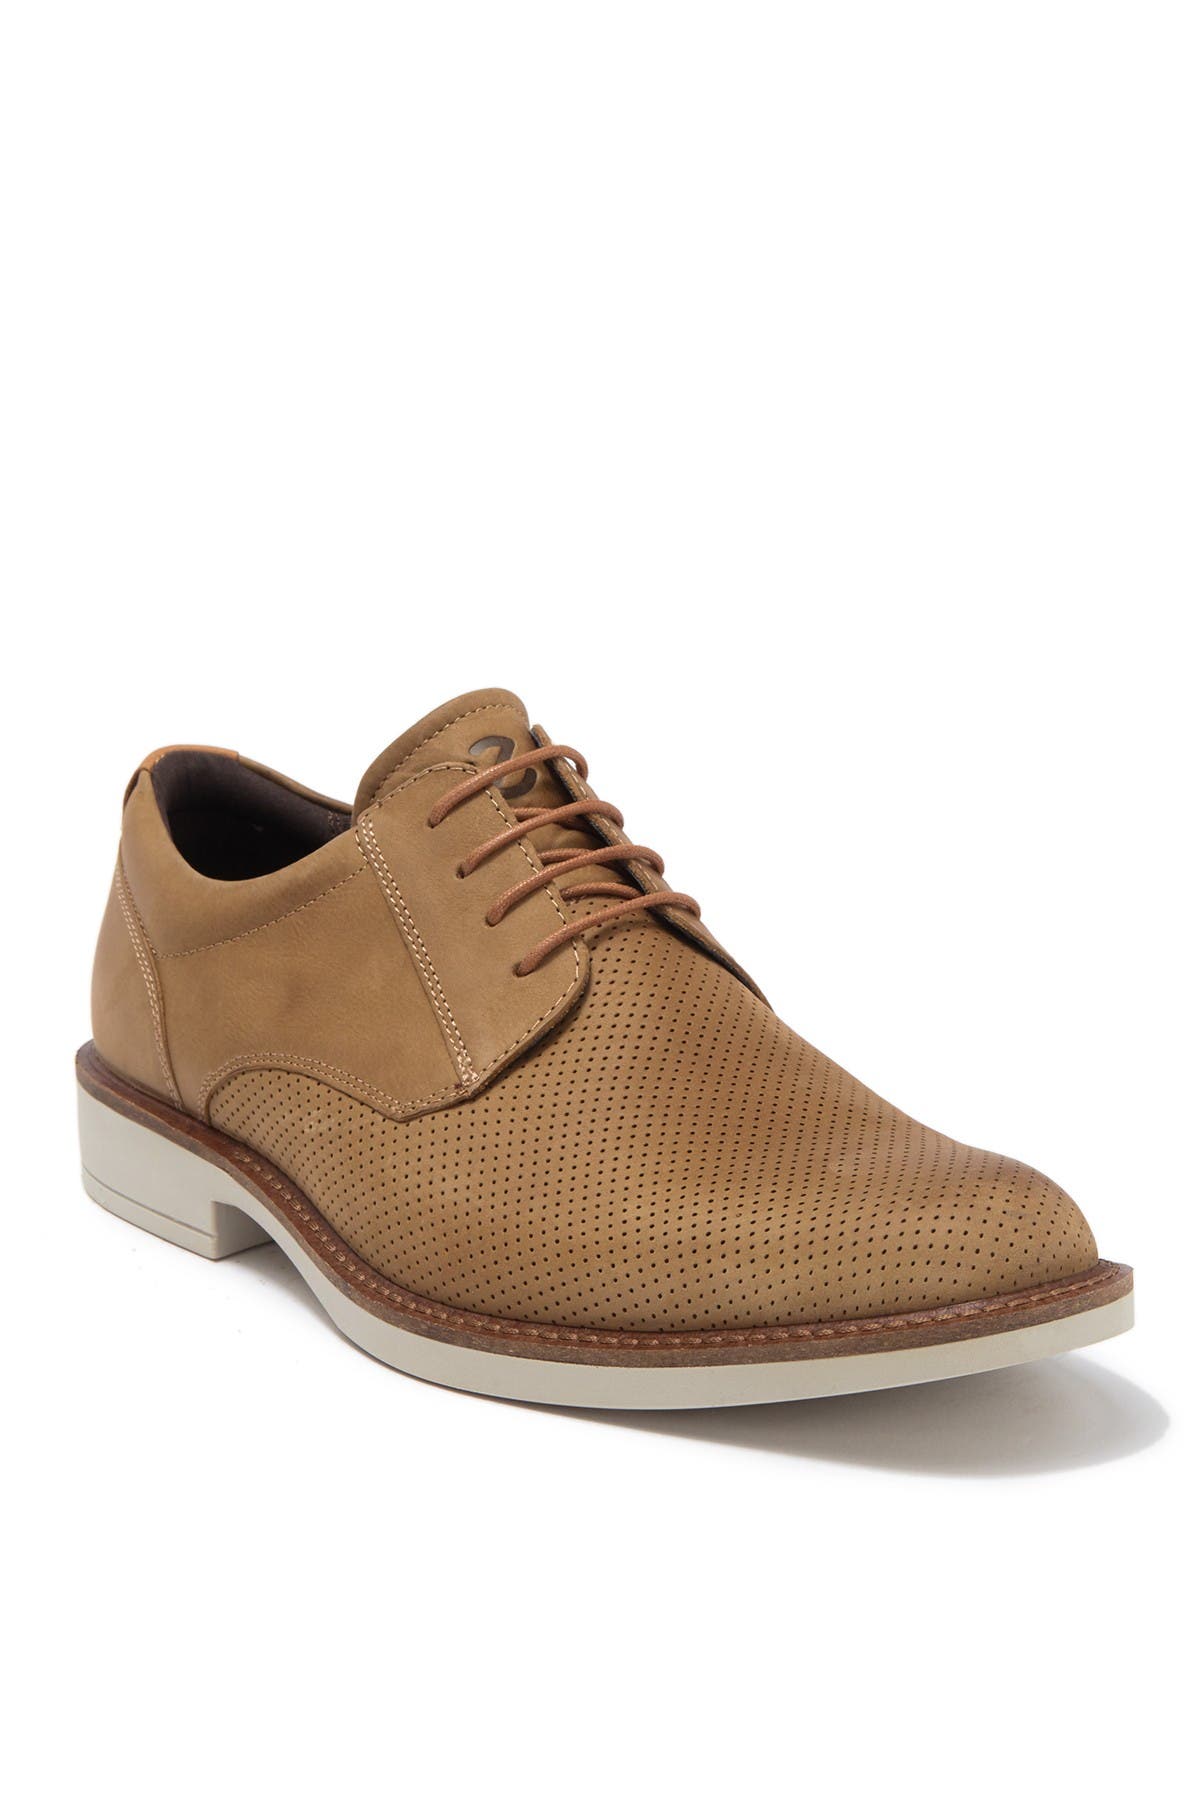 Ecco Biarritz Leather Perforated Cap Toe Derby In Camel/lion | ModeSens